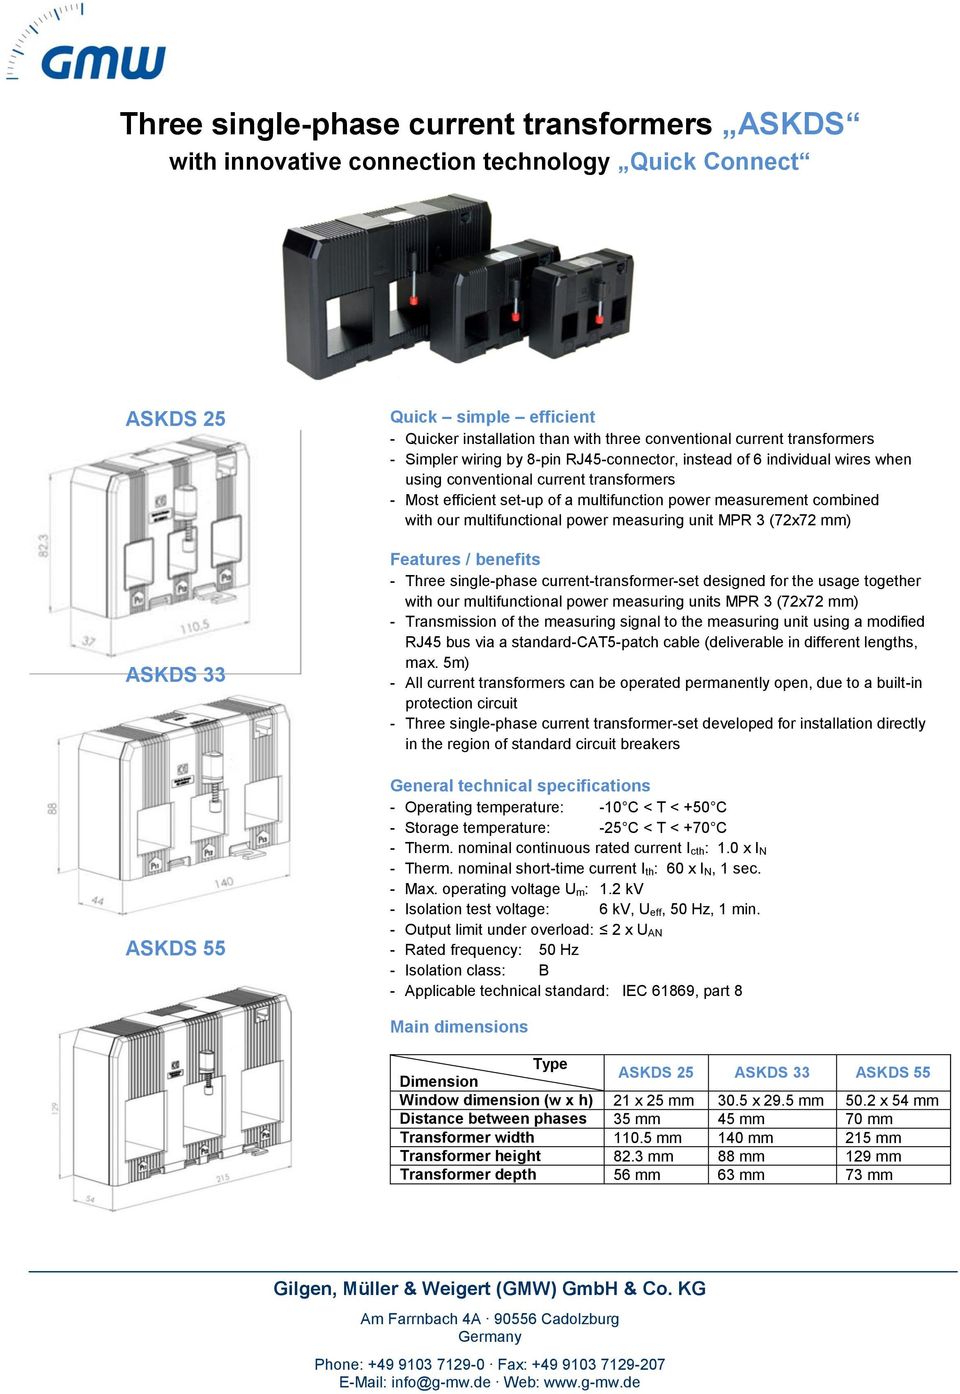 combined with our multifunctional power measuring unit MPR 3 (72x72 mm) Features / benefits - Three single-phase current-transformer-set designed for the usage together with our multifunctional power